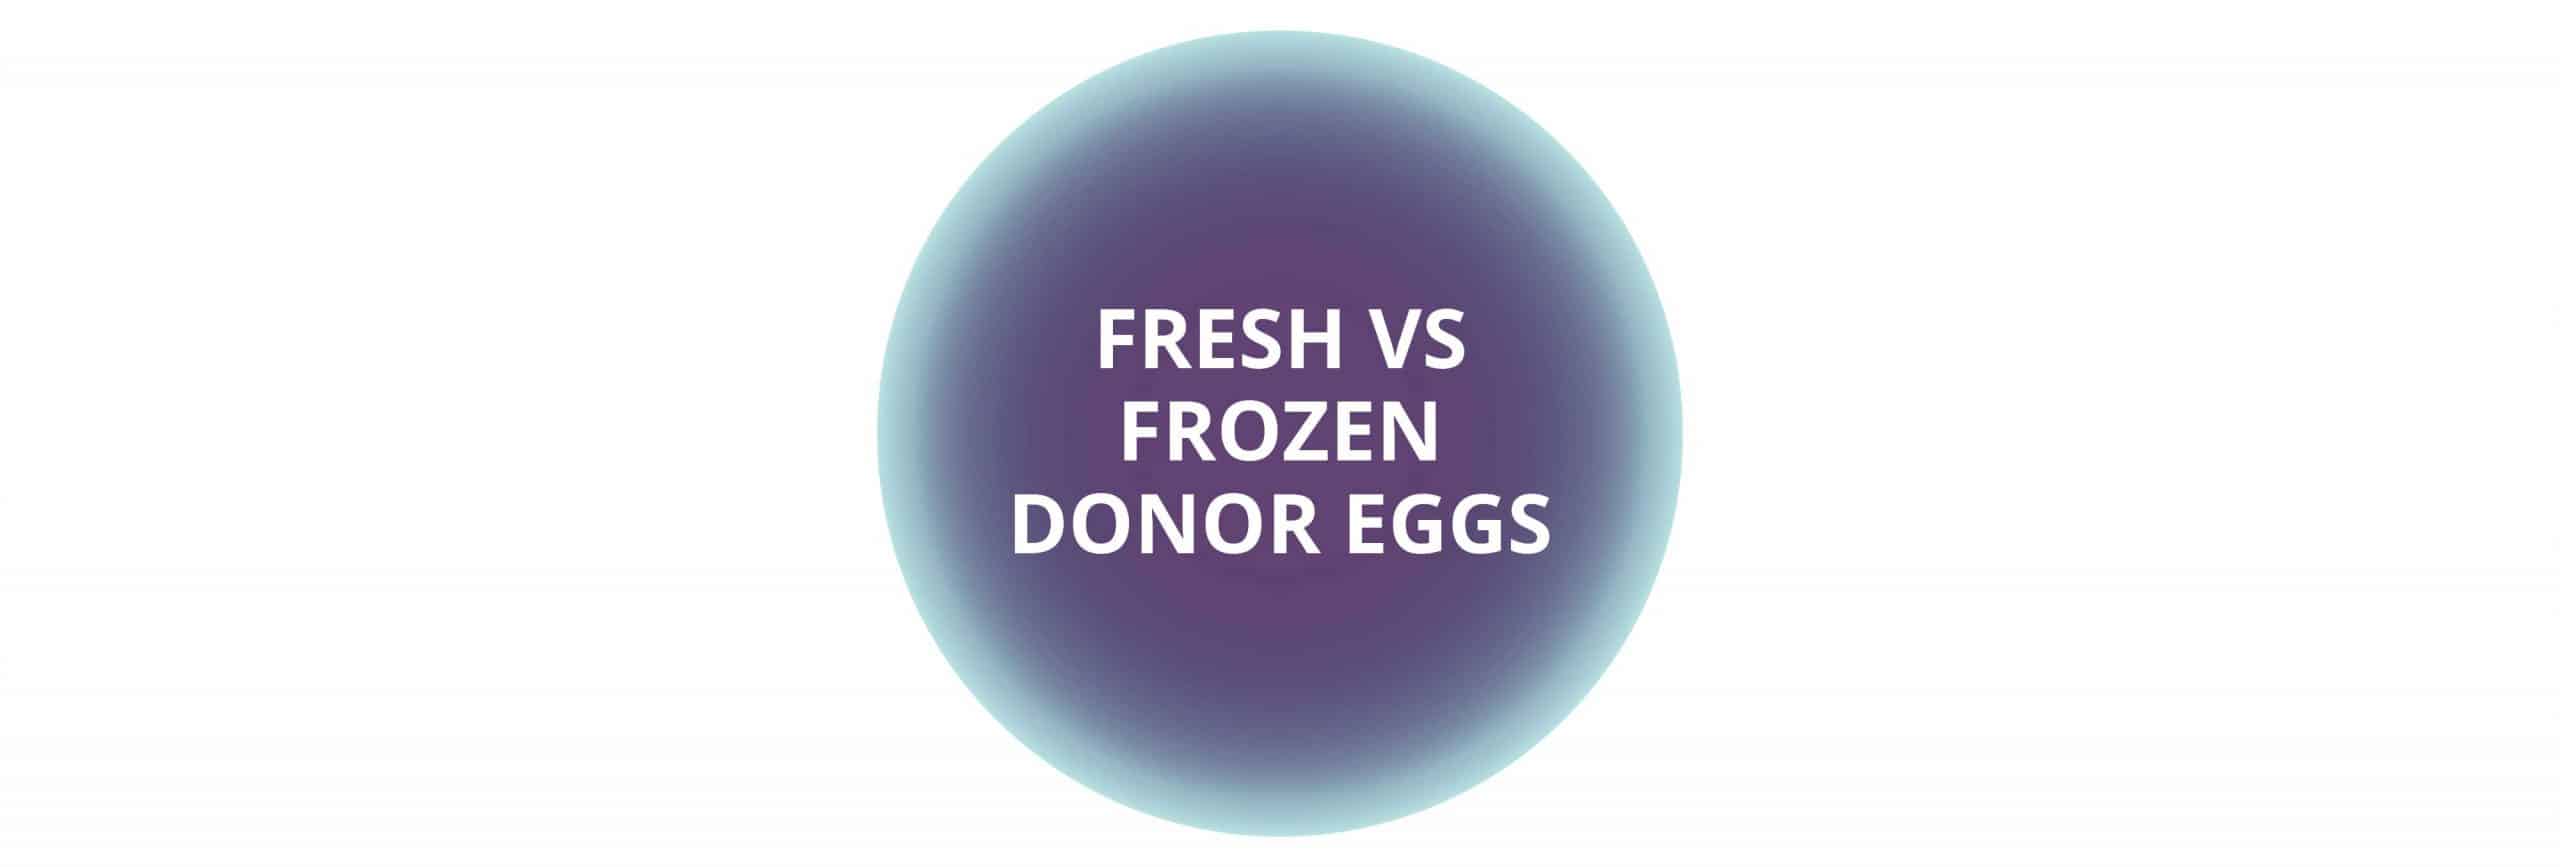 How Old Do You Have To Be To Donate Eggs In Canada / Donor